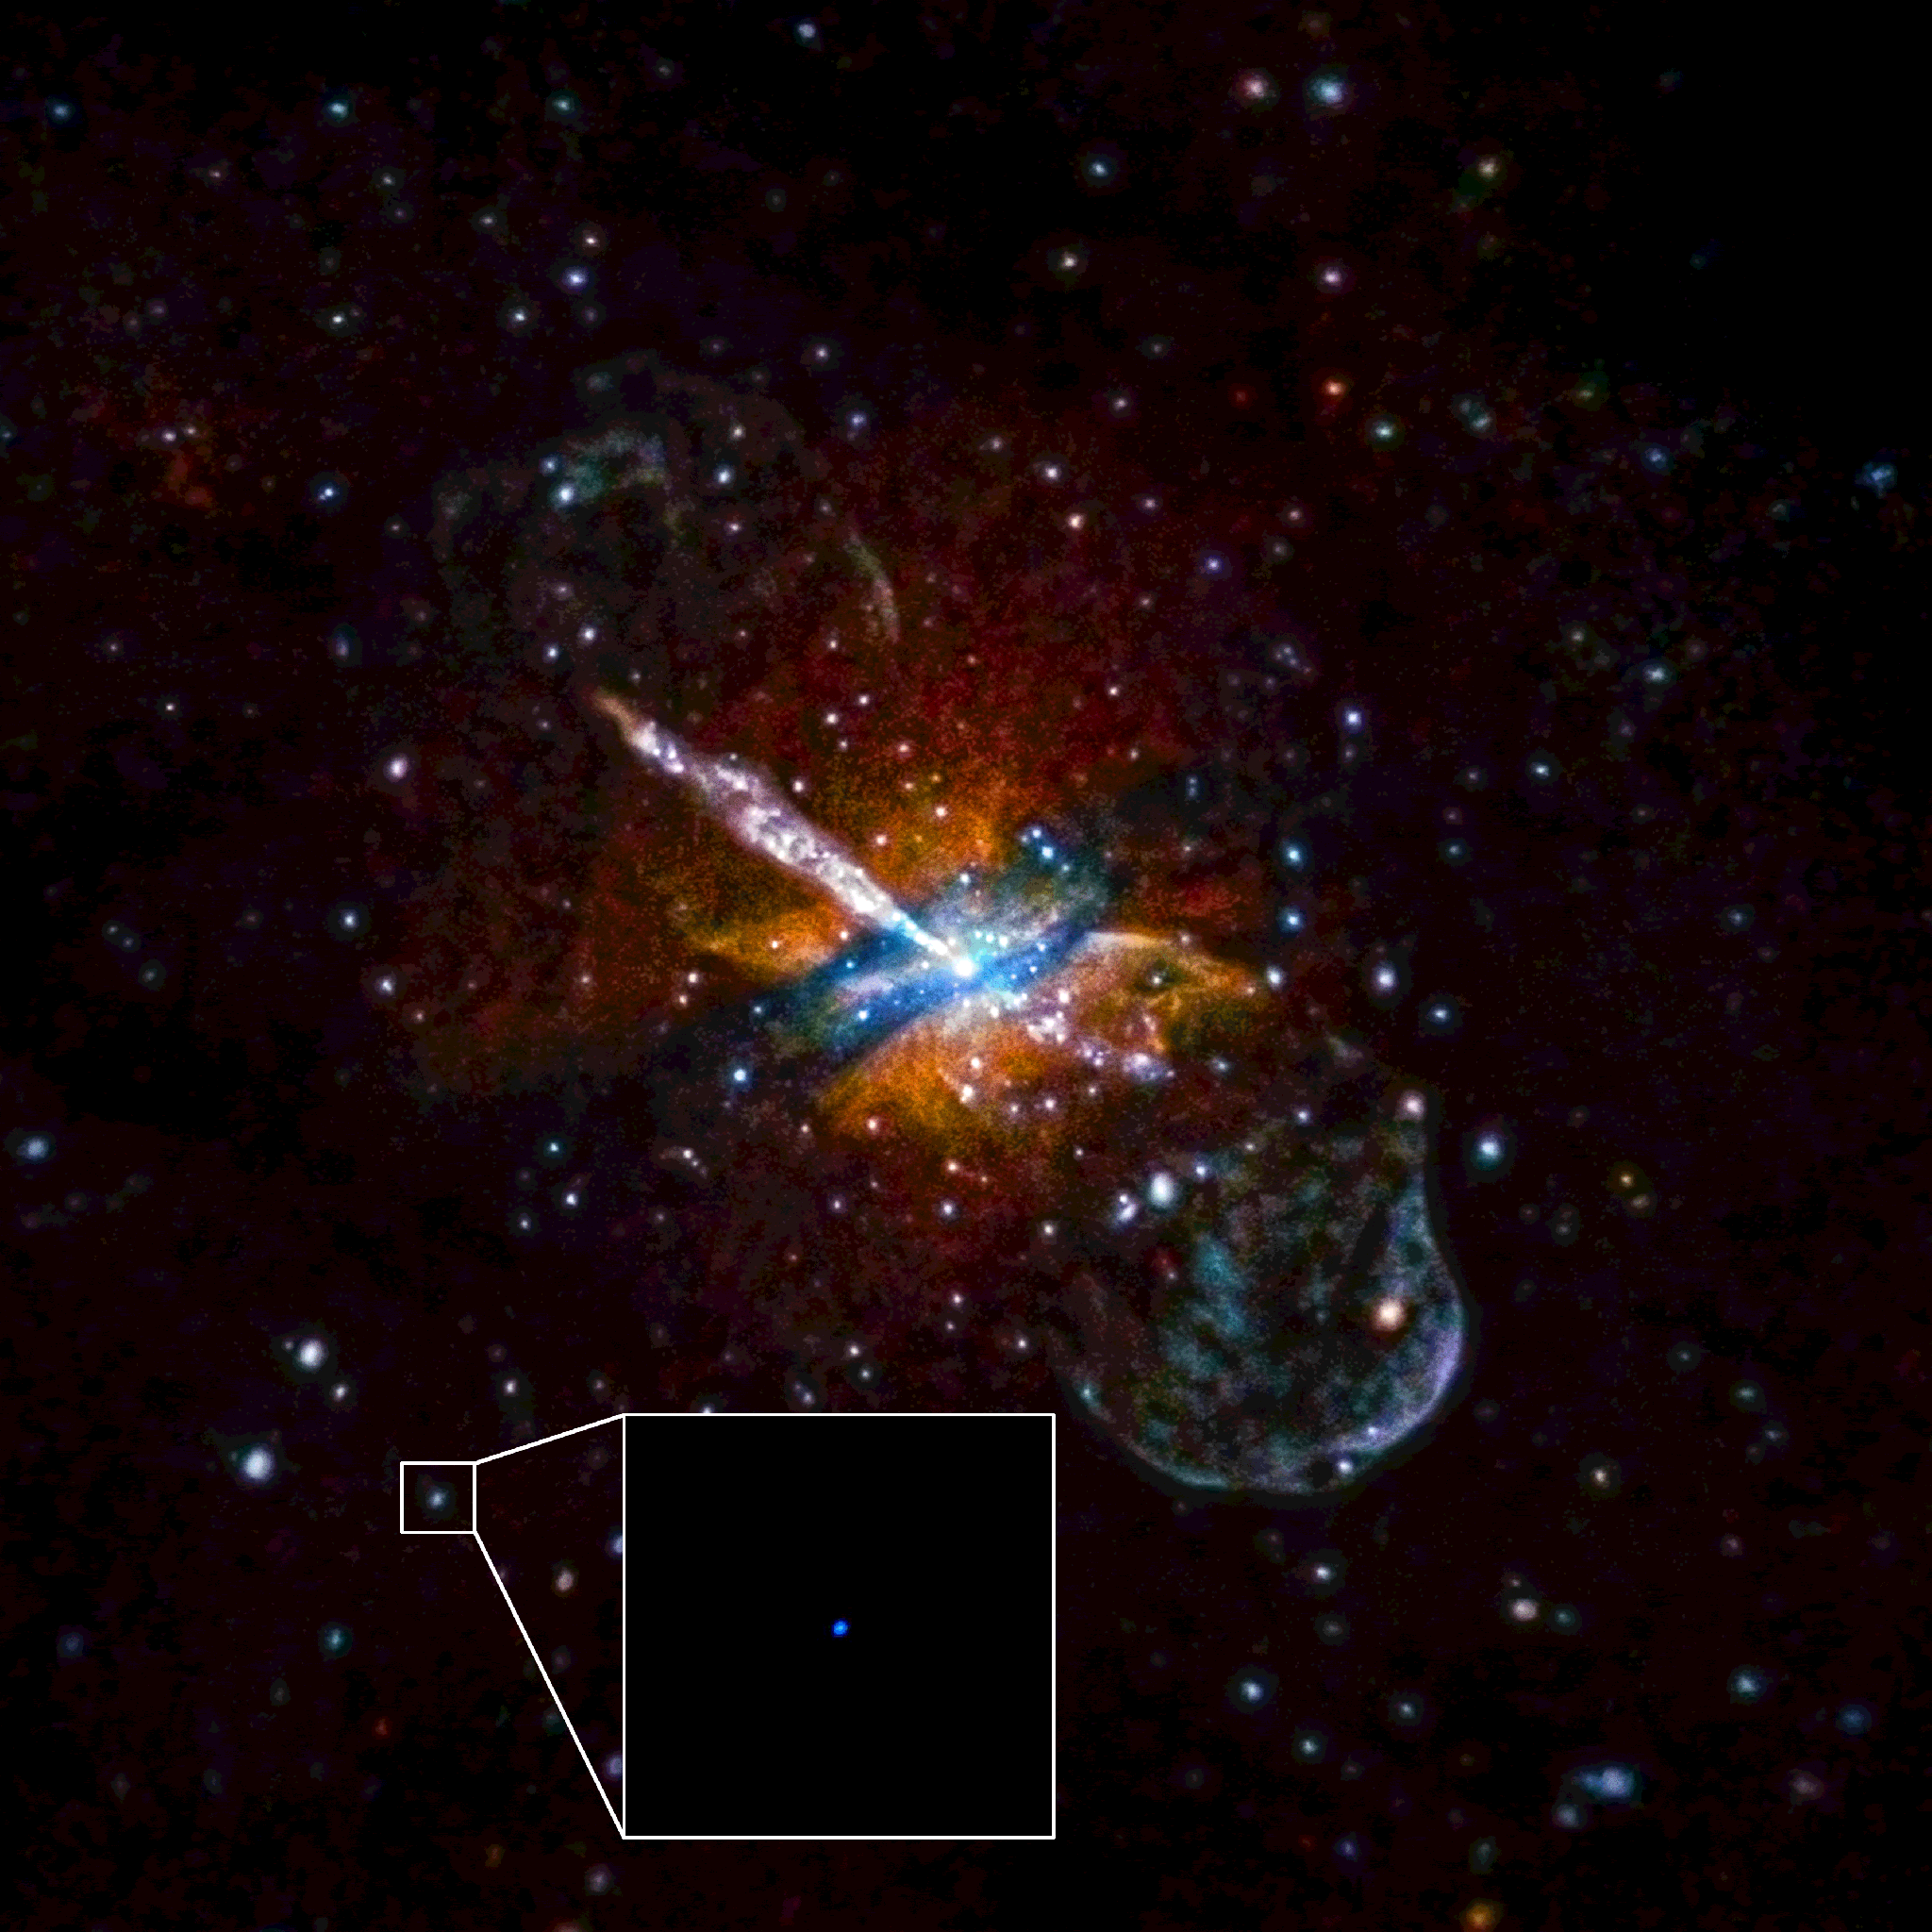 Animation of flaring X-ray source in Galaxy NGC 5128.